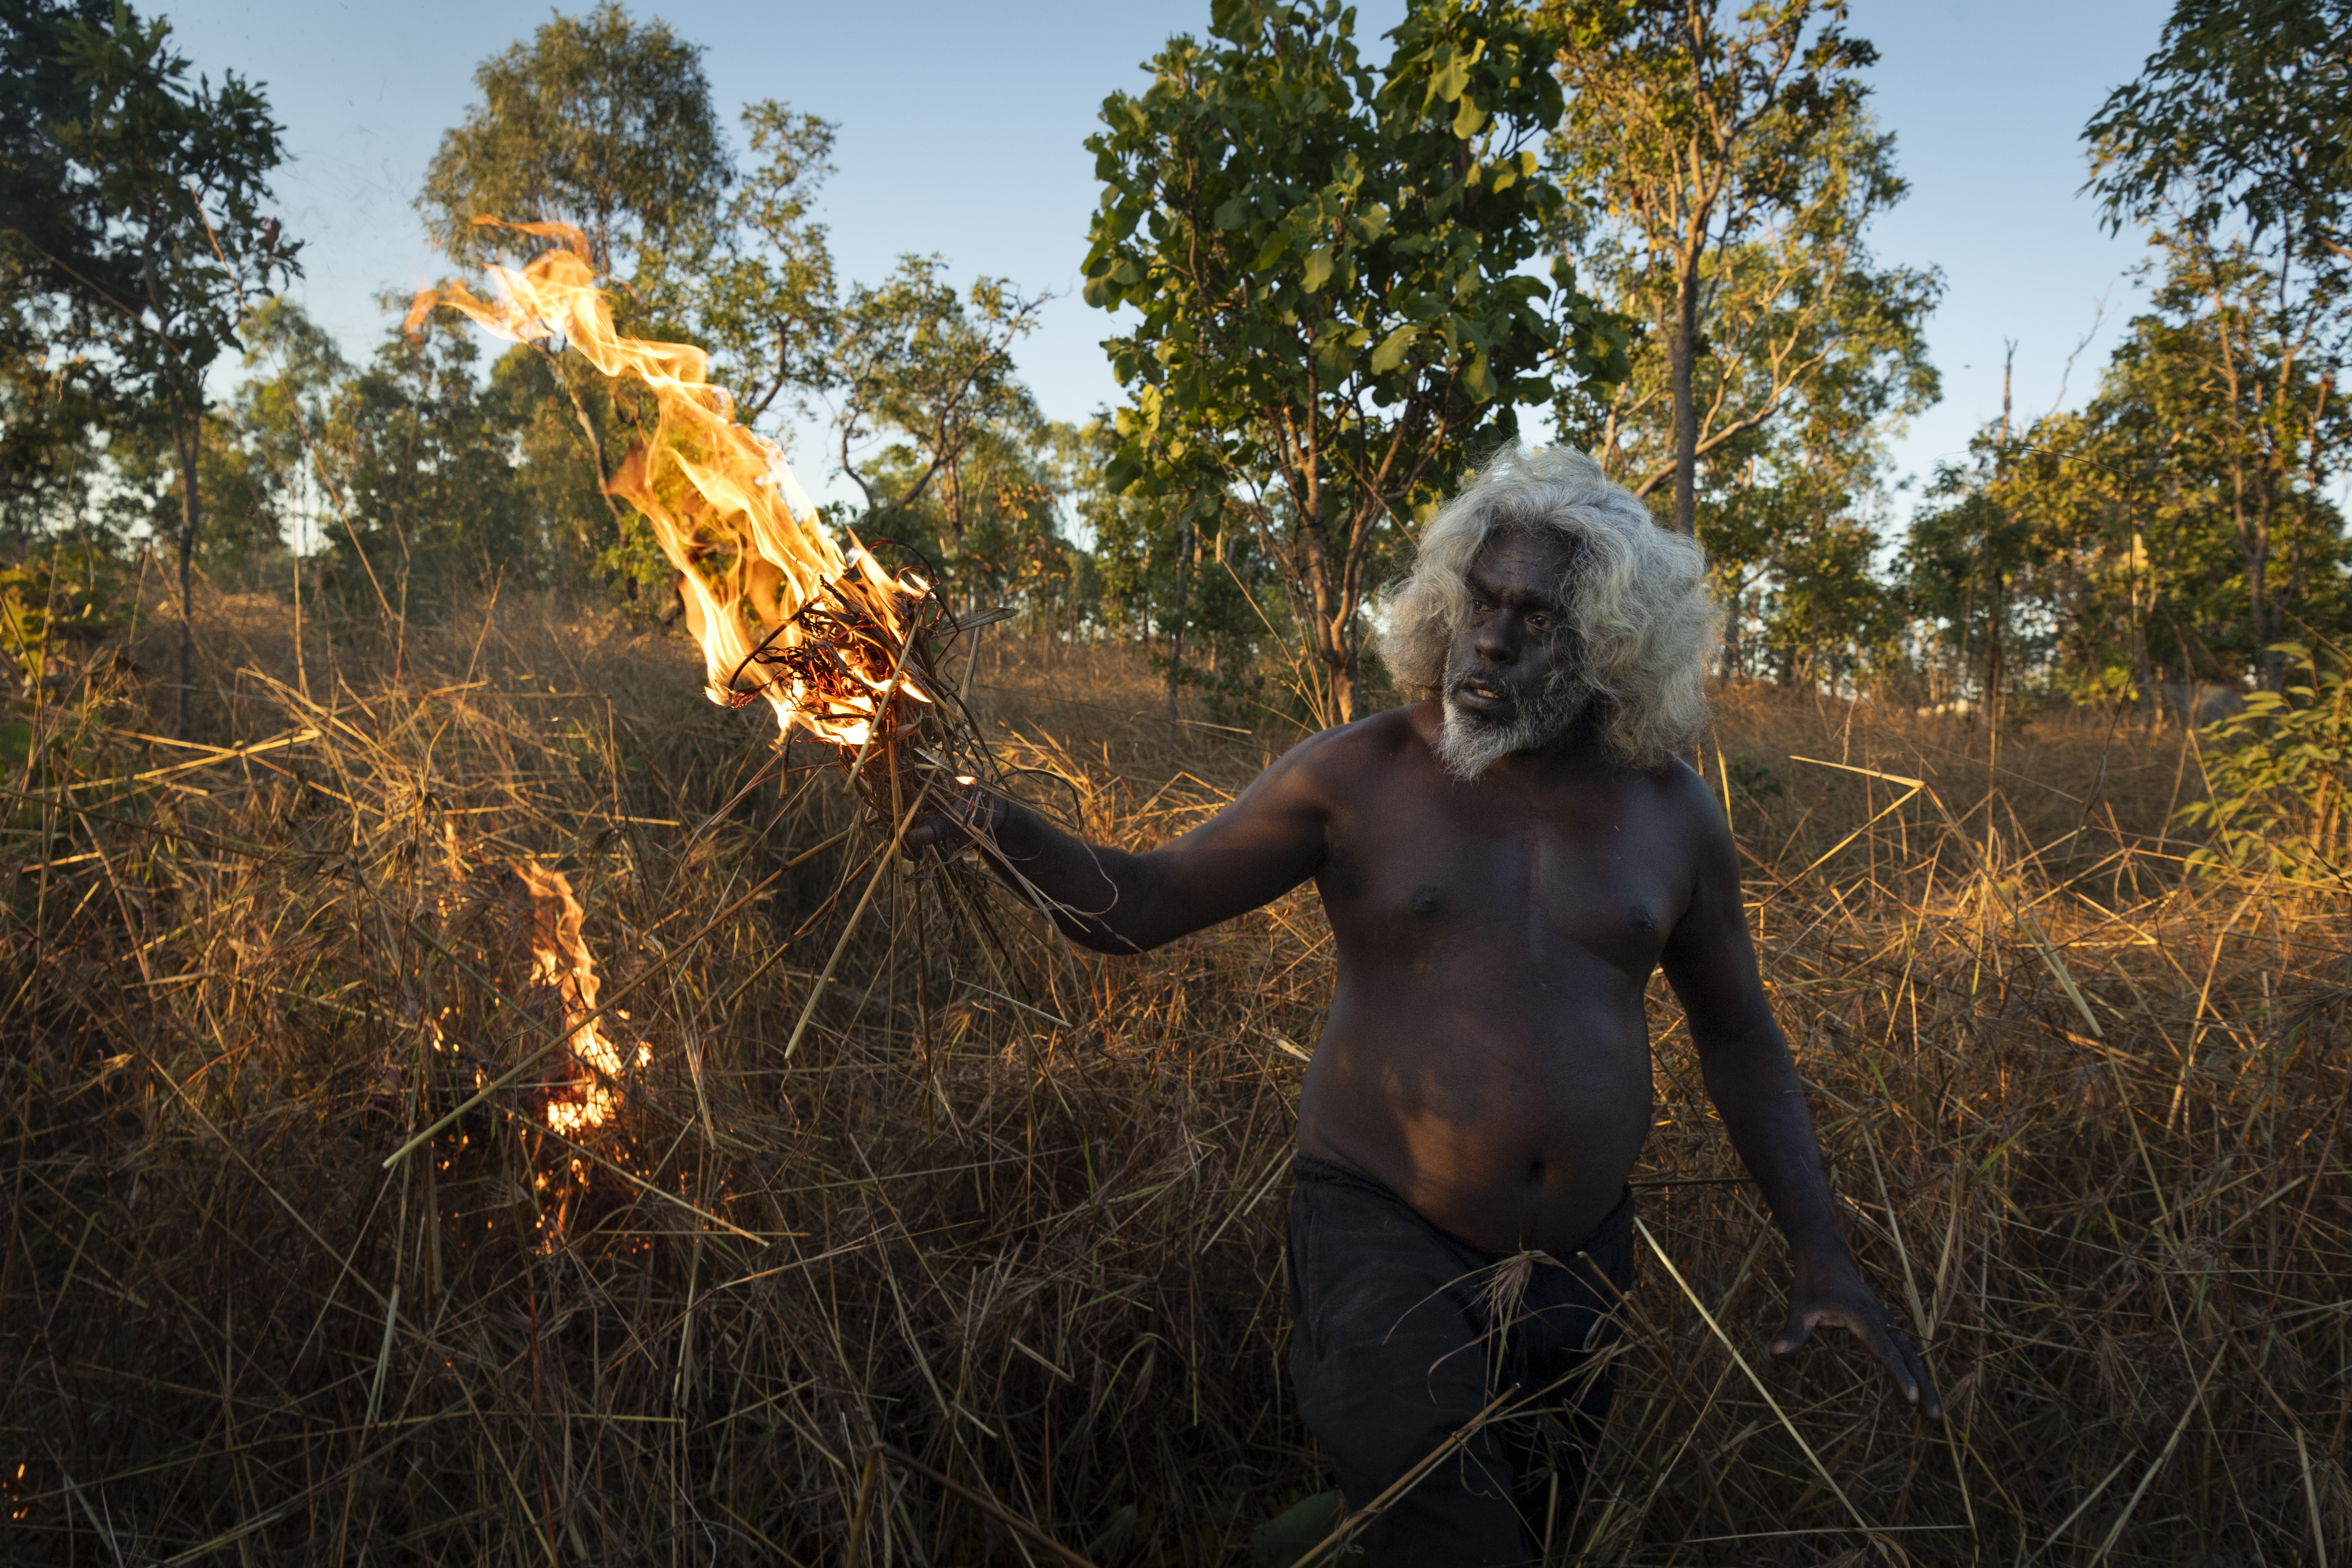 Nawarddeken elder Conrad Maralngurra burns grass to protect the Mamadawerre community from late-season wildfires, in Mamadawerre, Arnhem Land, Australia. The late-evening fire will die out naturally once the temperature drops and moisture levels rise.